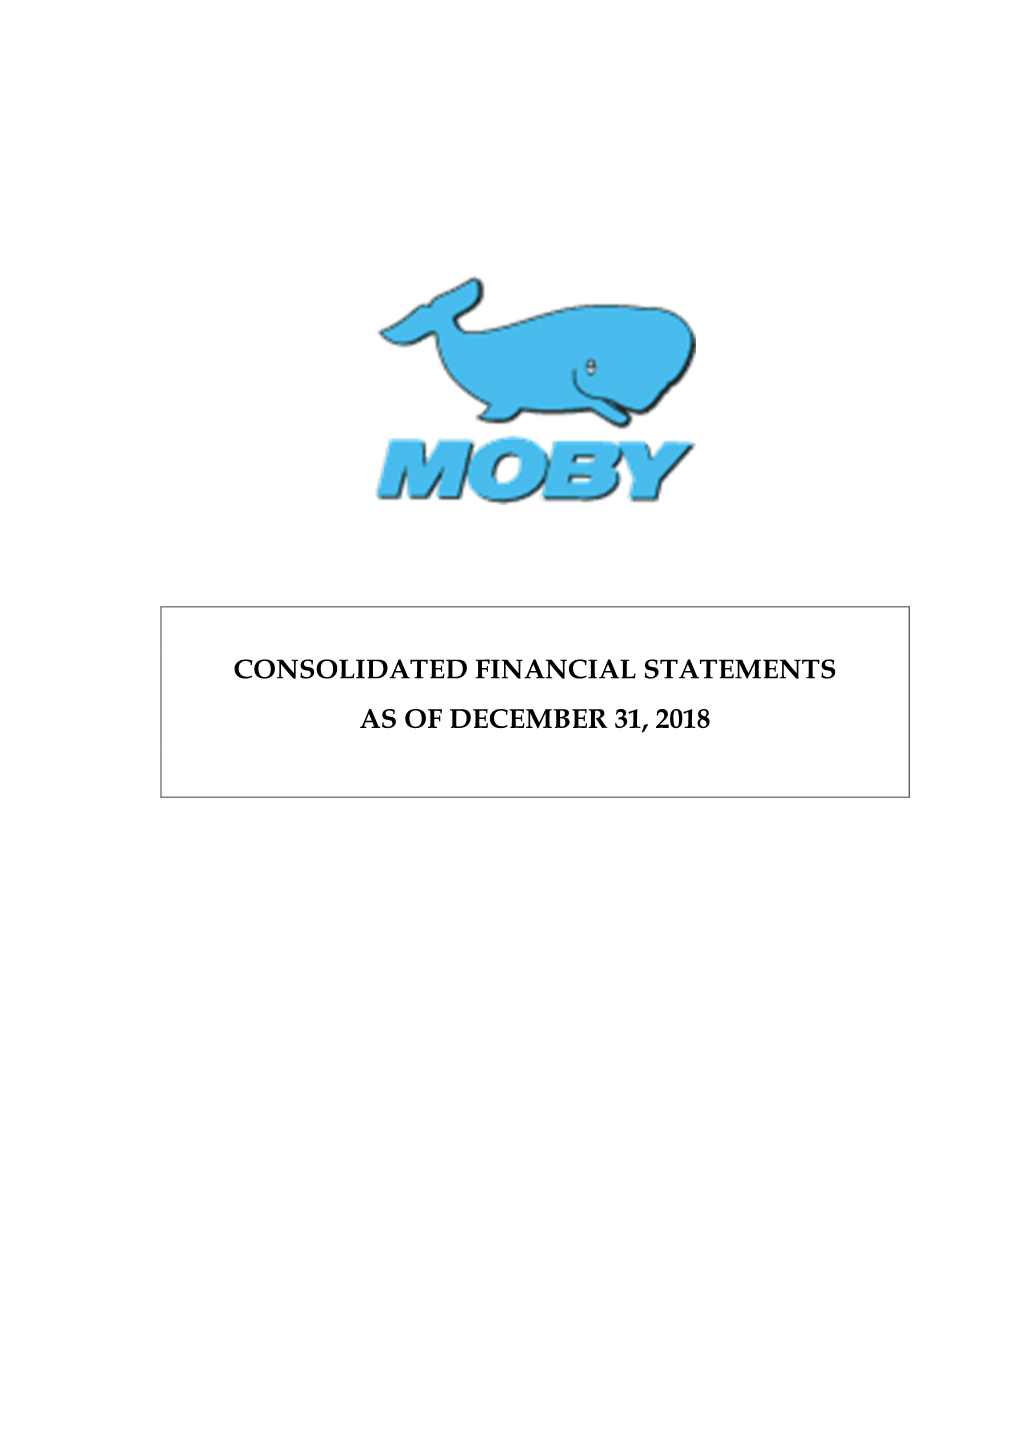 Consolidated Financial Statements As of December 31, 2018